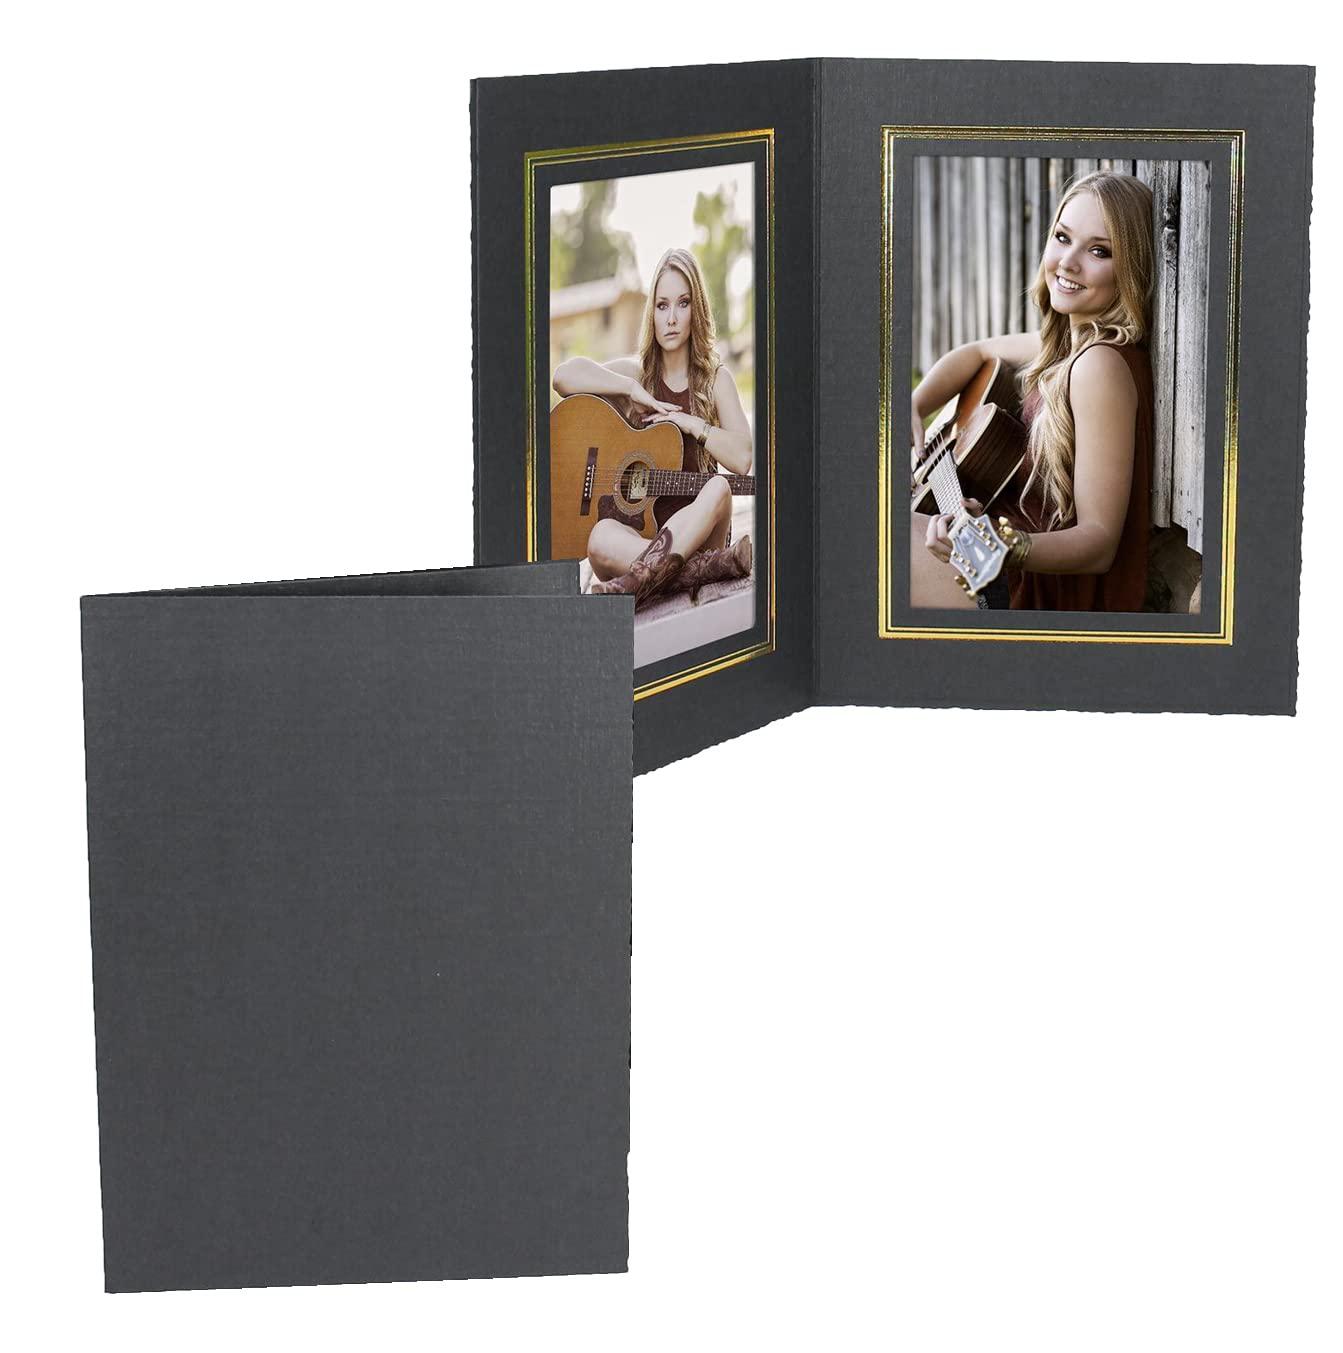 Studio Style By Collectors Gallery black cardboard double photo folder frame/gold foil border sold in 25s - 4x6